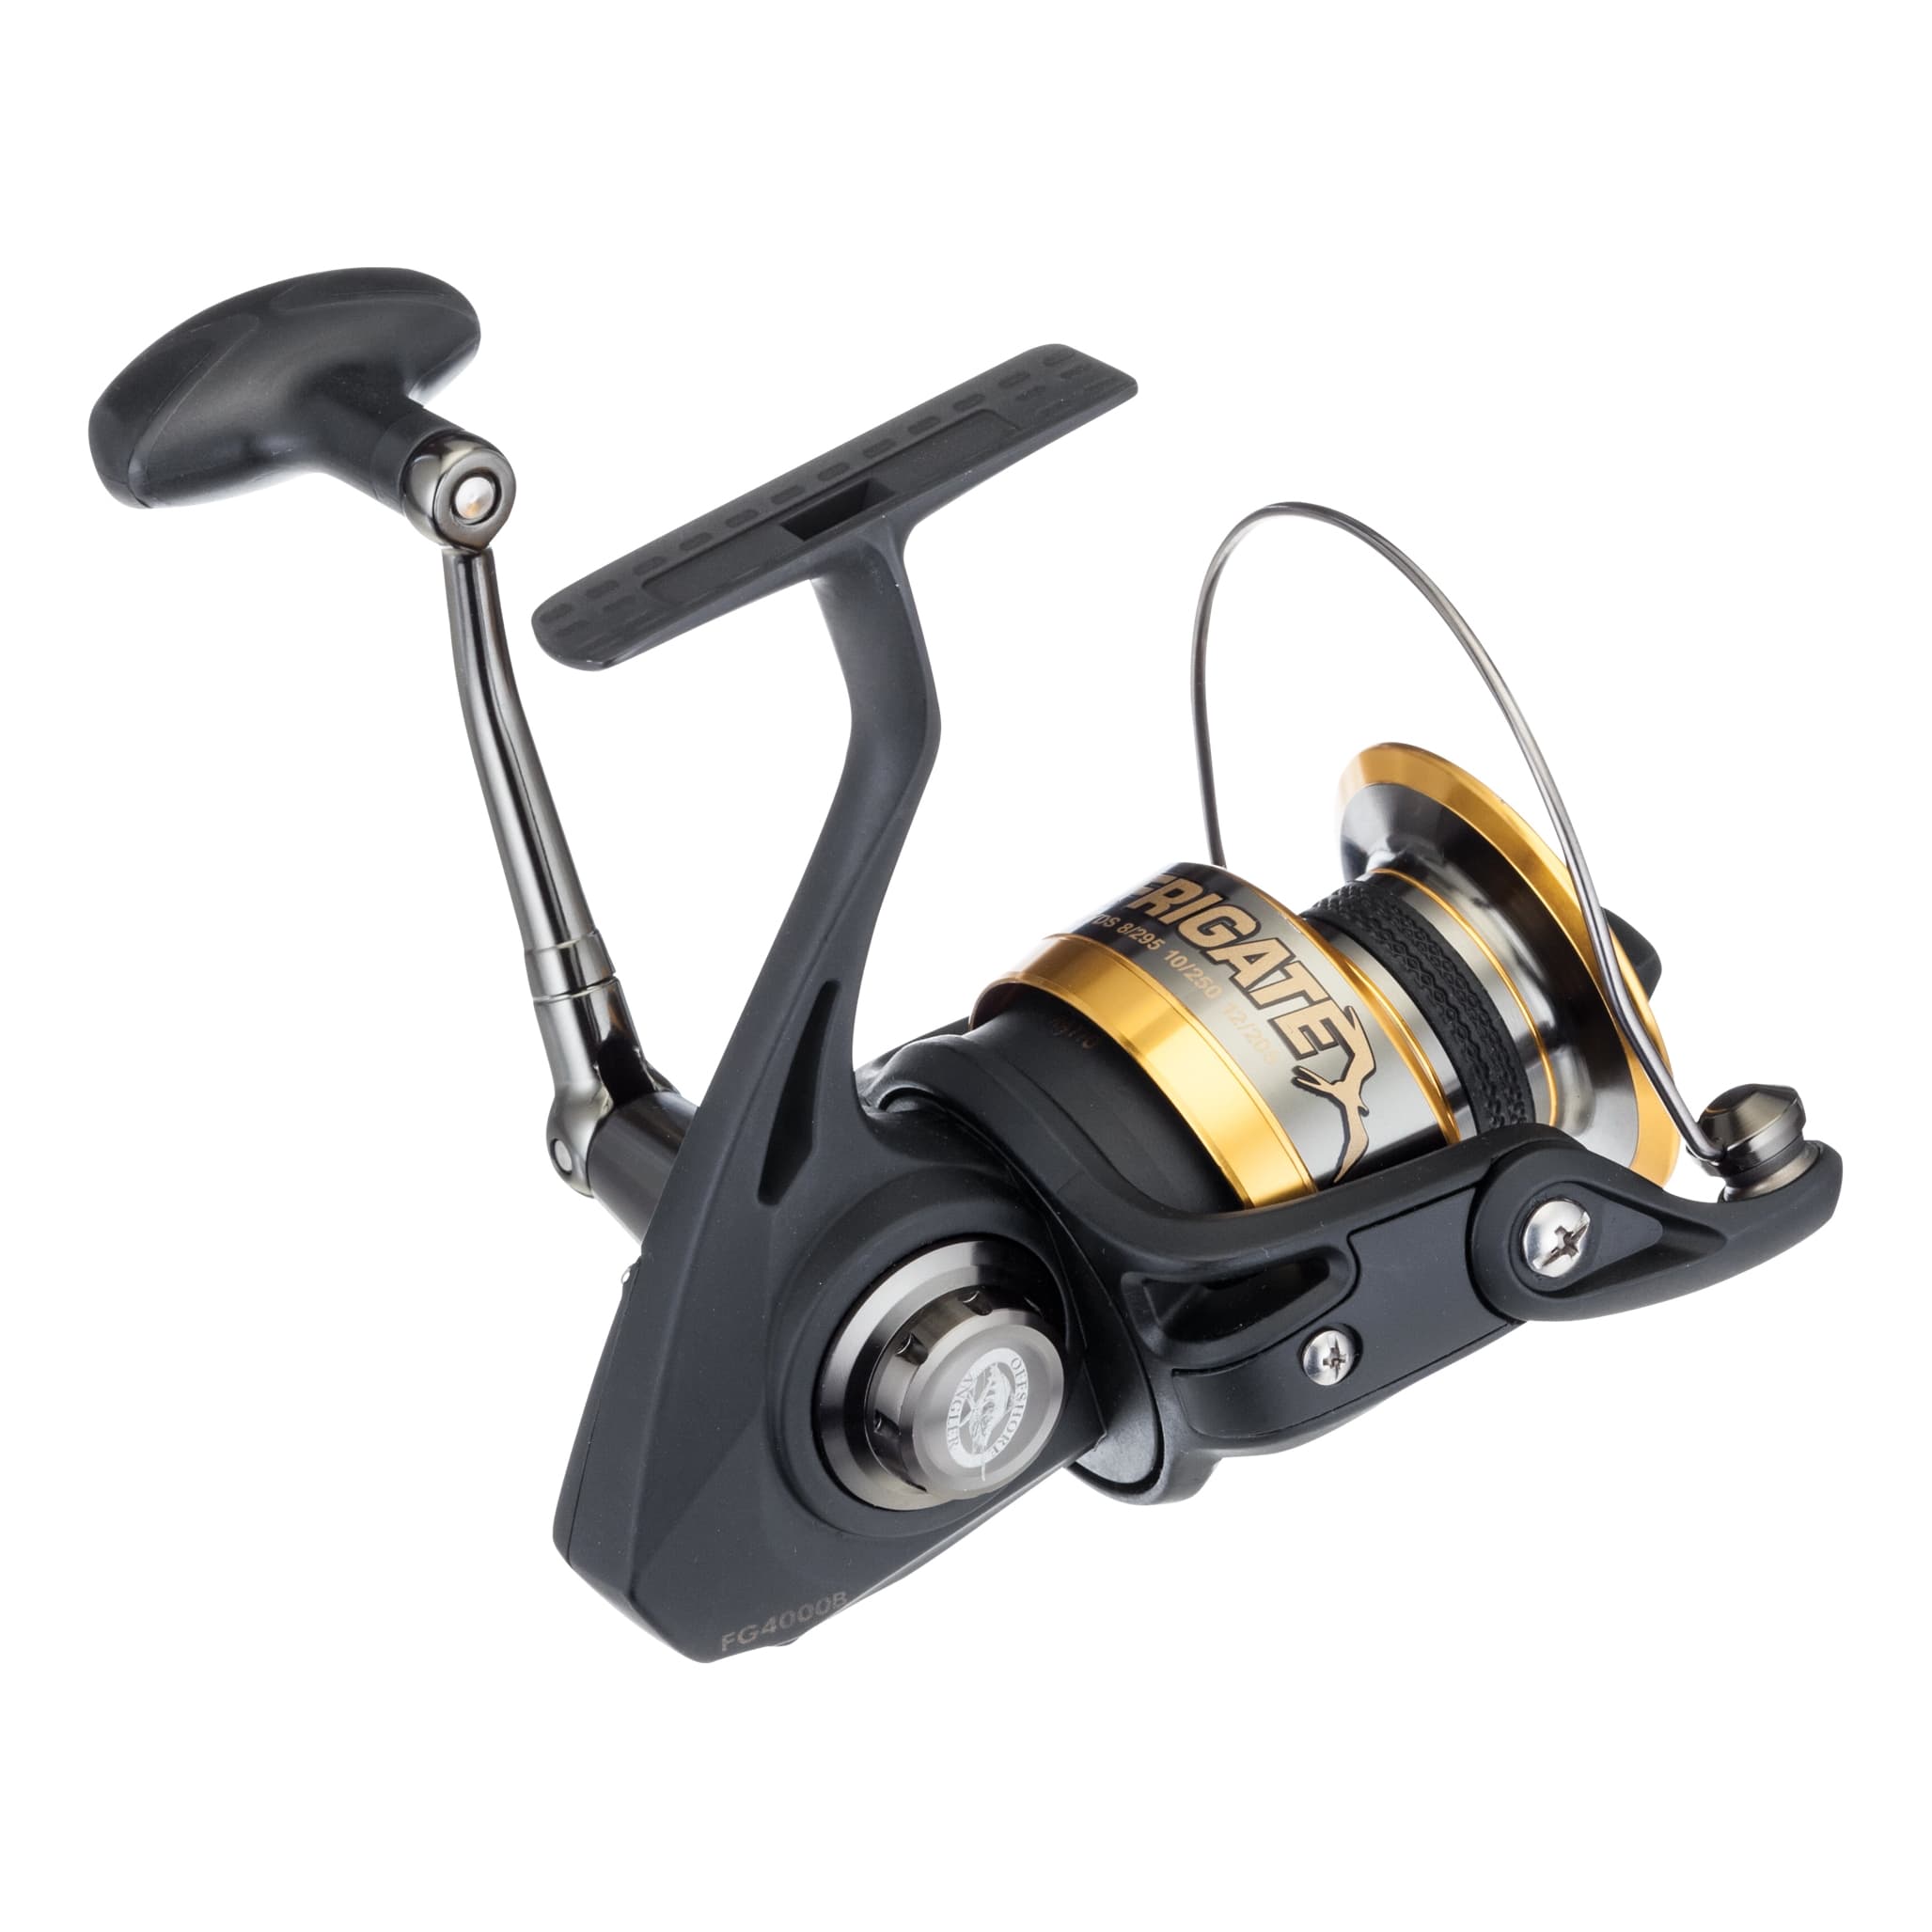  Tgoon Spinning Fishing Reel, Interchangeable Rocker Arm Large  Capacit Line Cup Cold Forging Technology Chamfer Outlet Fishing Reel 5.2:1  for Sea Fishing(COCO1500) : Sports & Outdoors